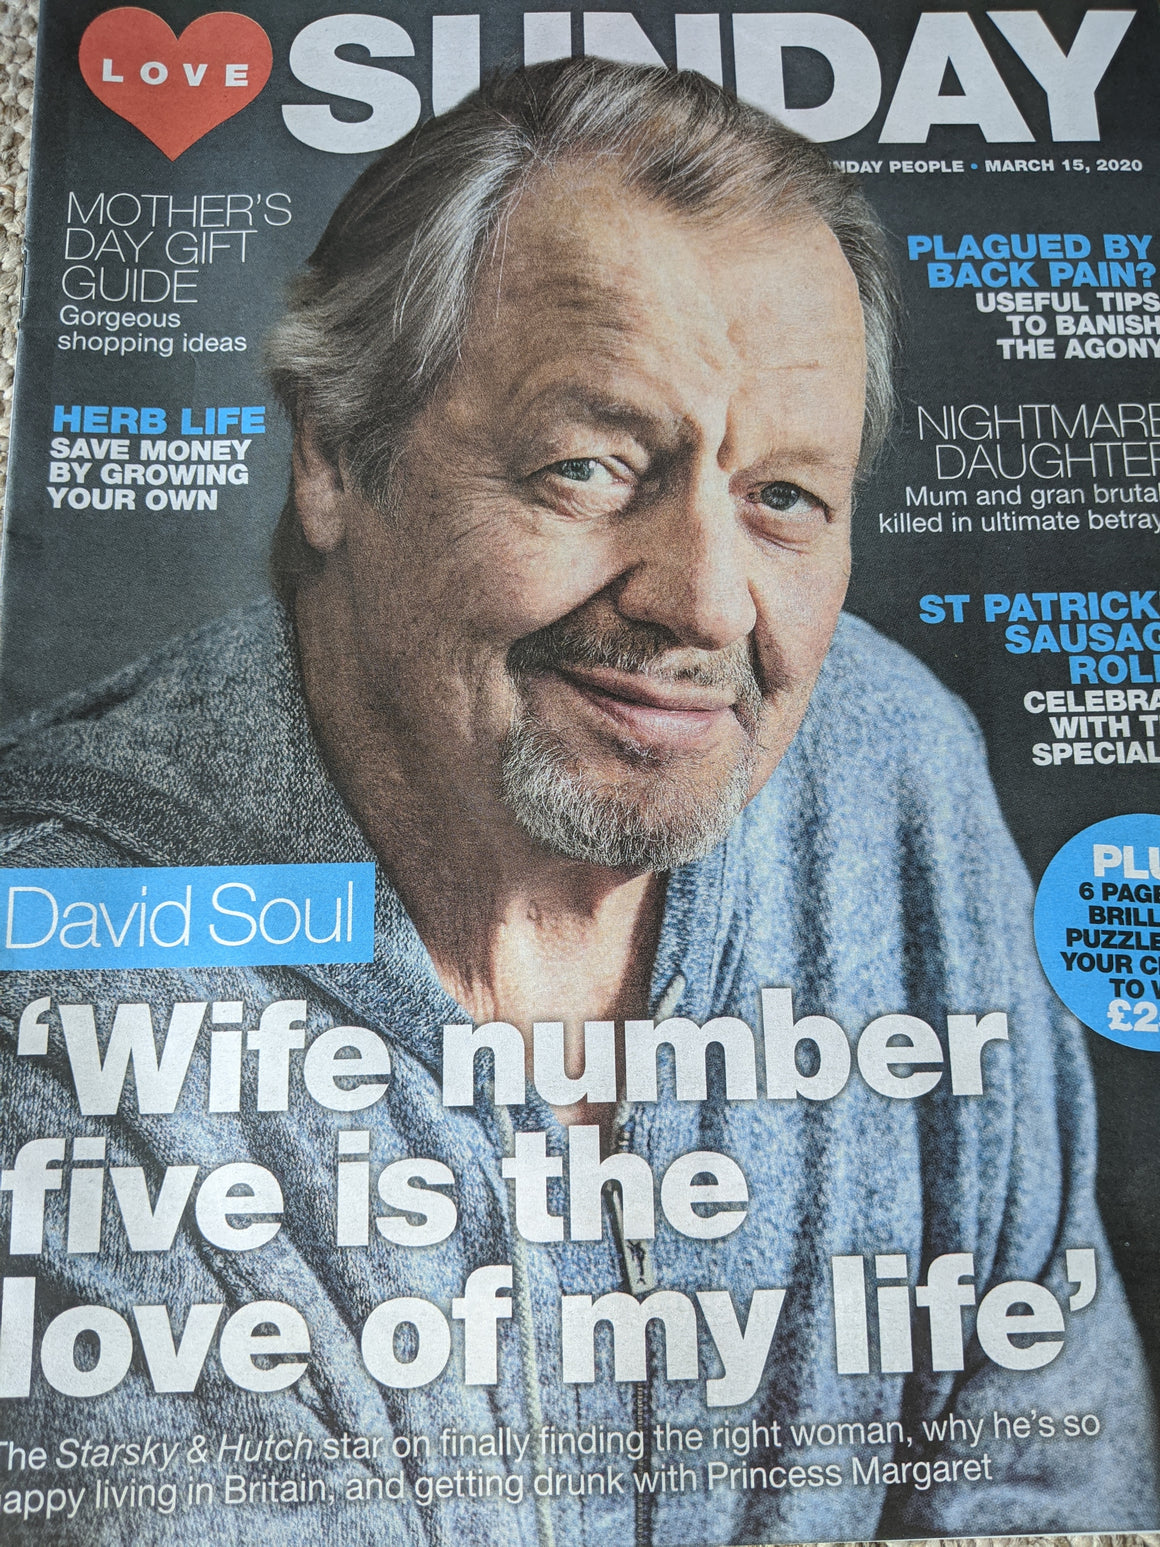 Love Sunday Magazine March 2020: David Soul Cover Interview